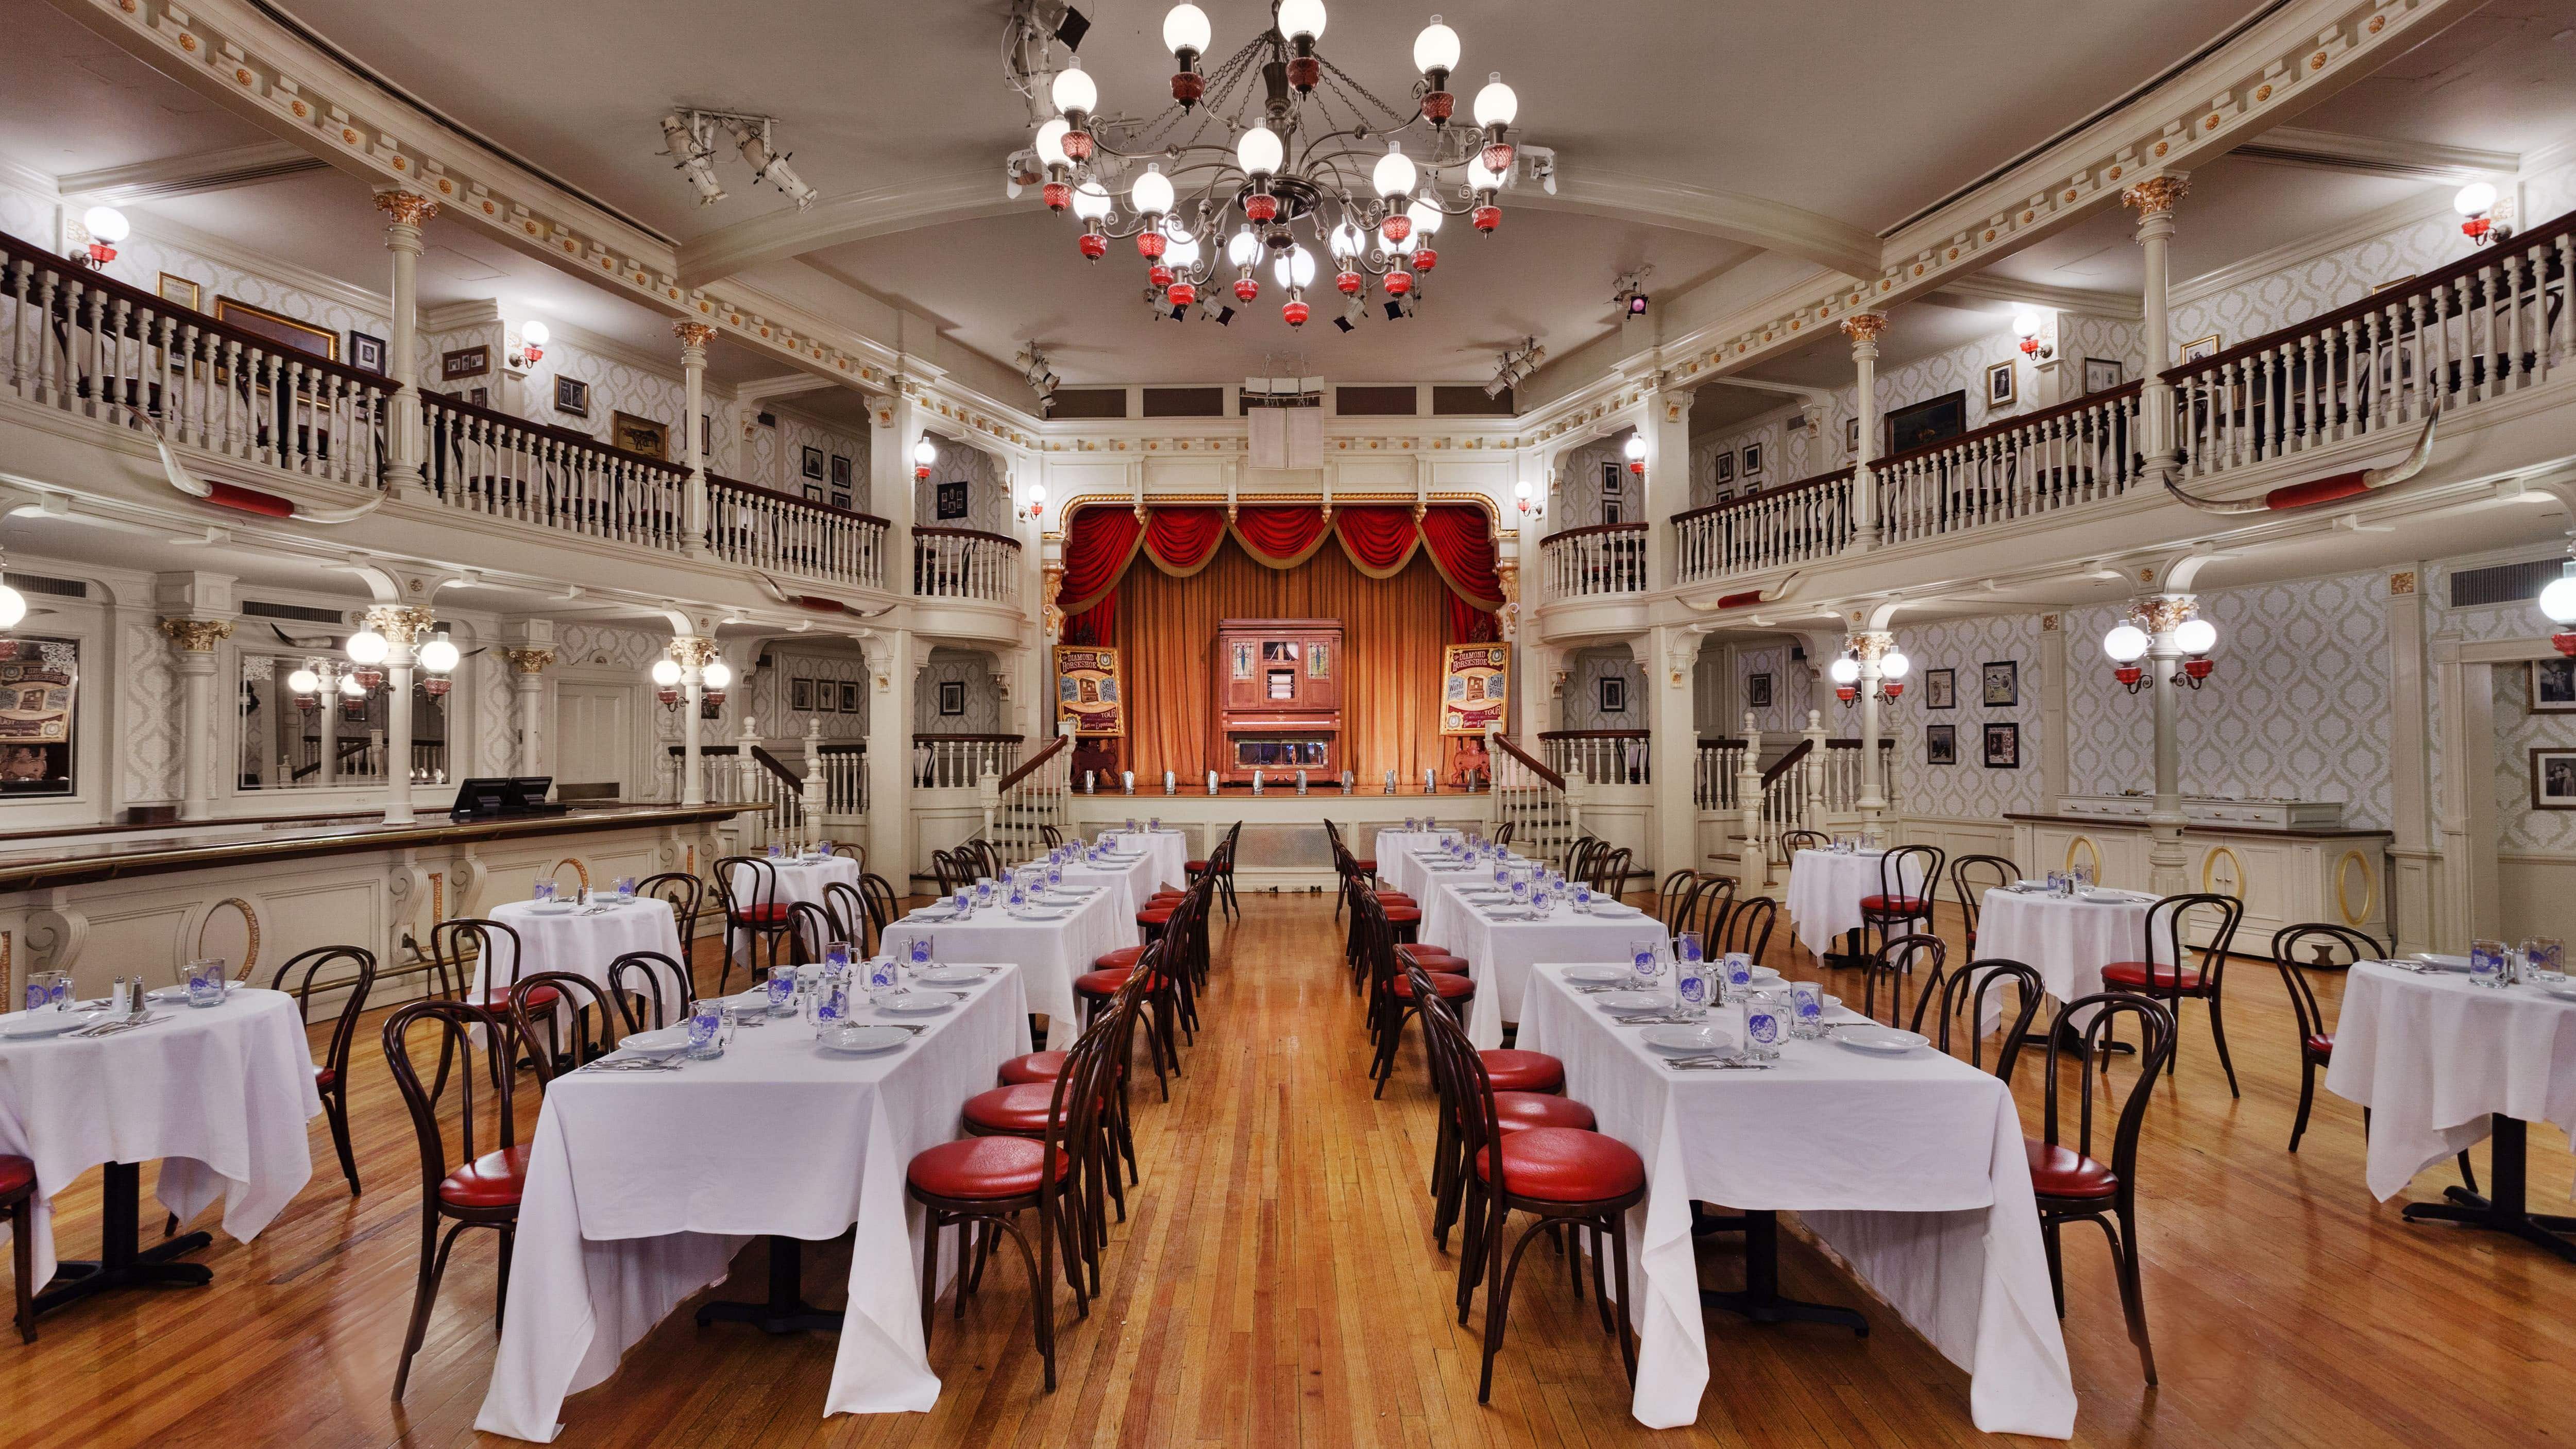 Pros and Cons for All Magic Kingdom Restaurants - Diamond Horseshoe (lunch)